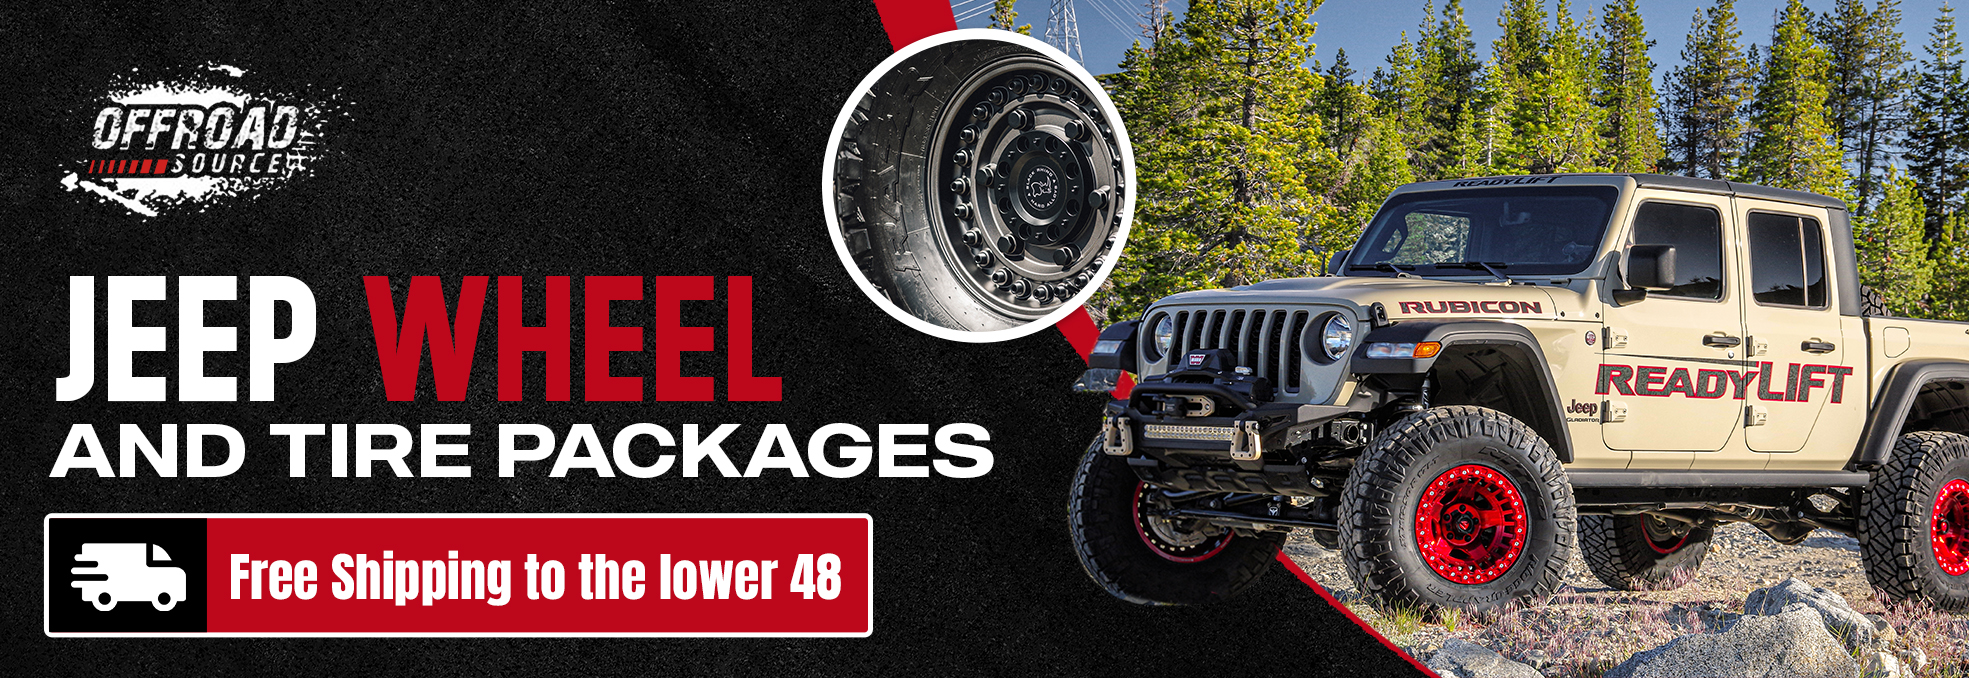 Jeep Wheel and Tire Packages | Save Big When buying together